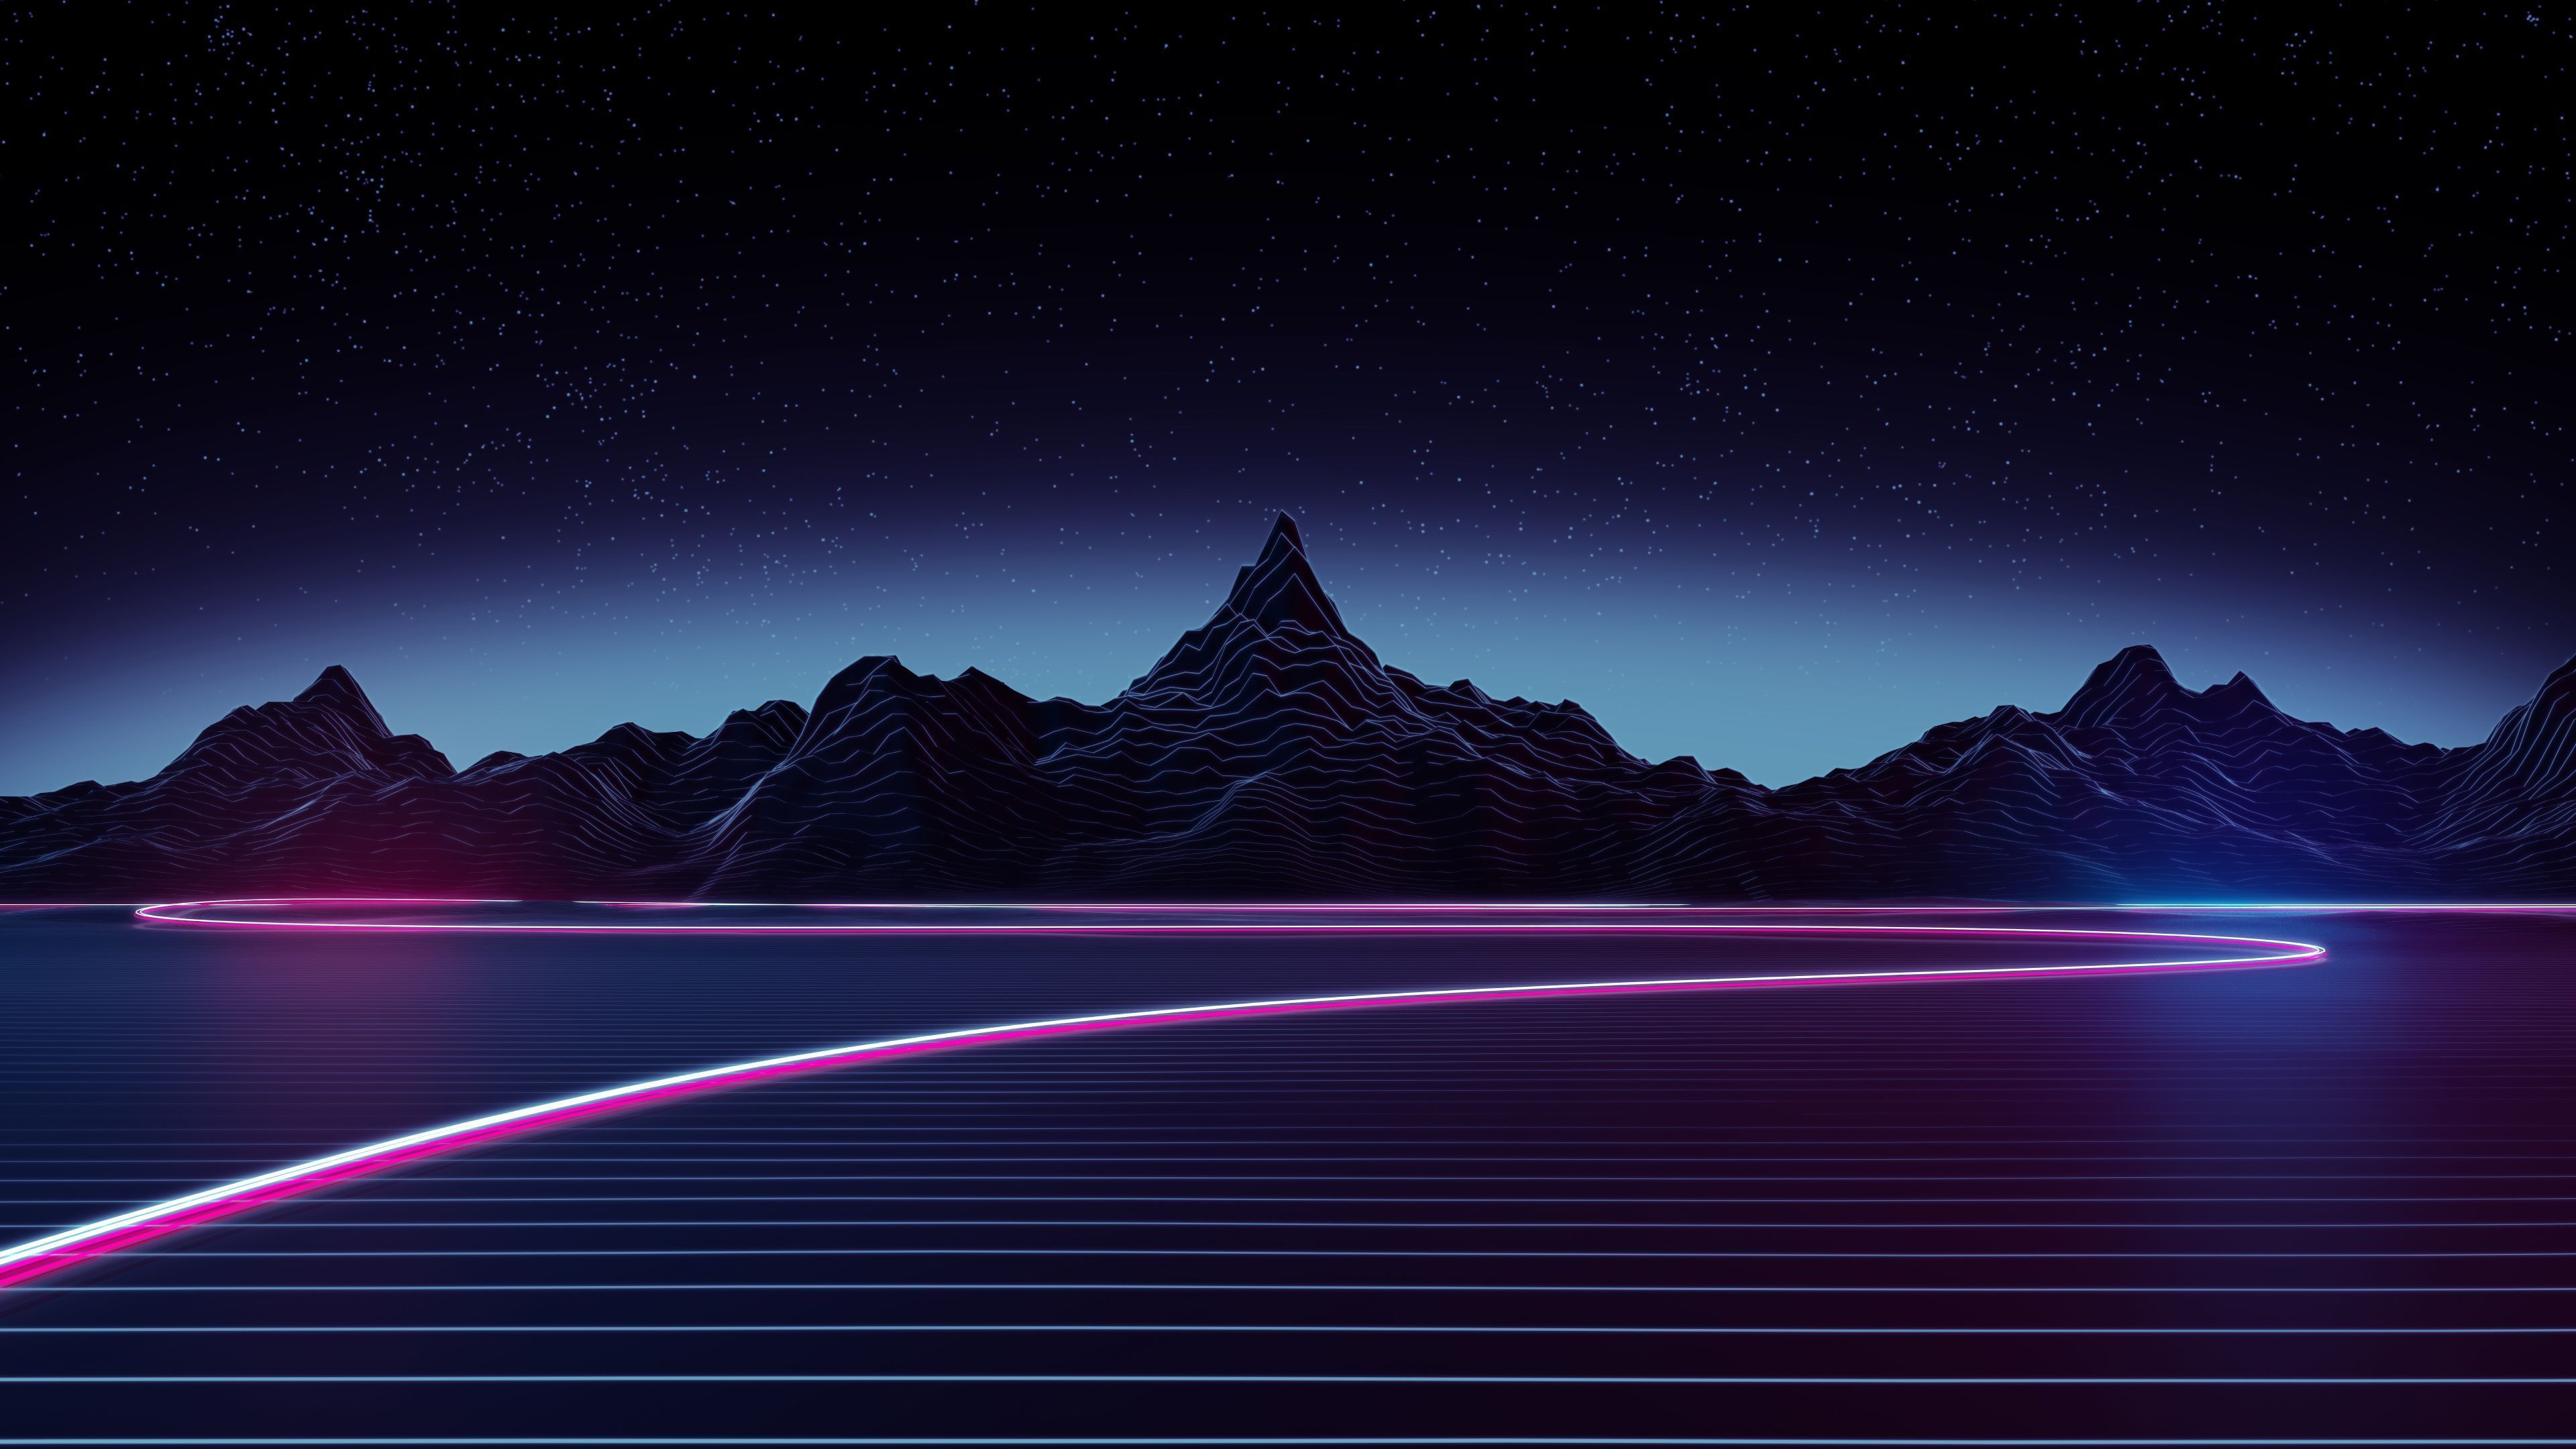 A futuristic neon landscape with a pink trail leading towards a mountain range under a starry night sky. - Synthwave